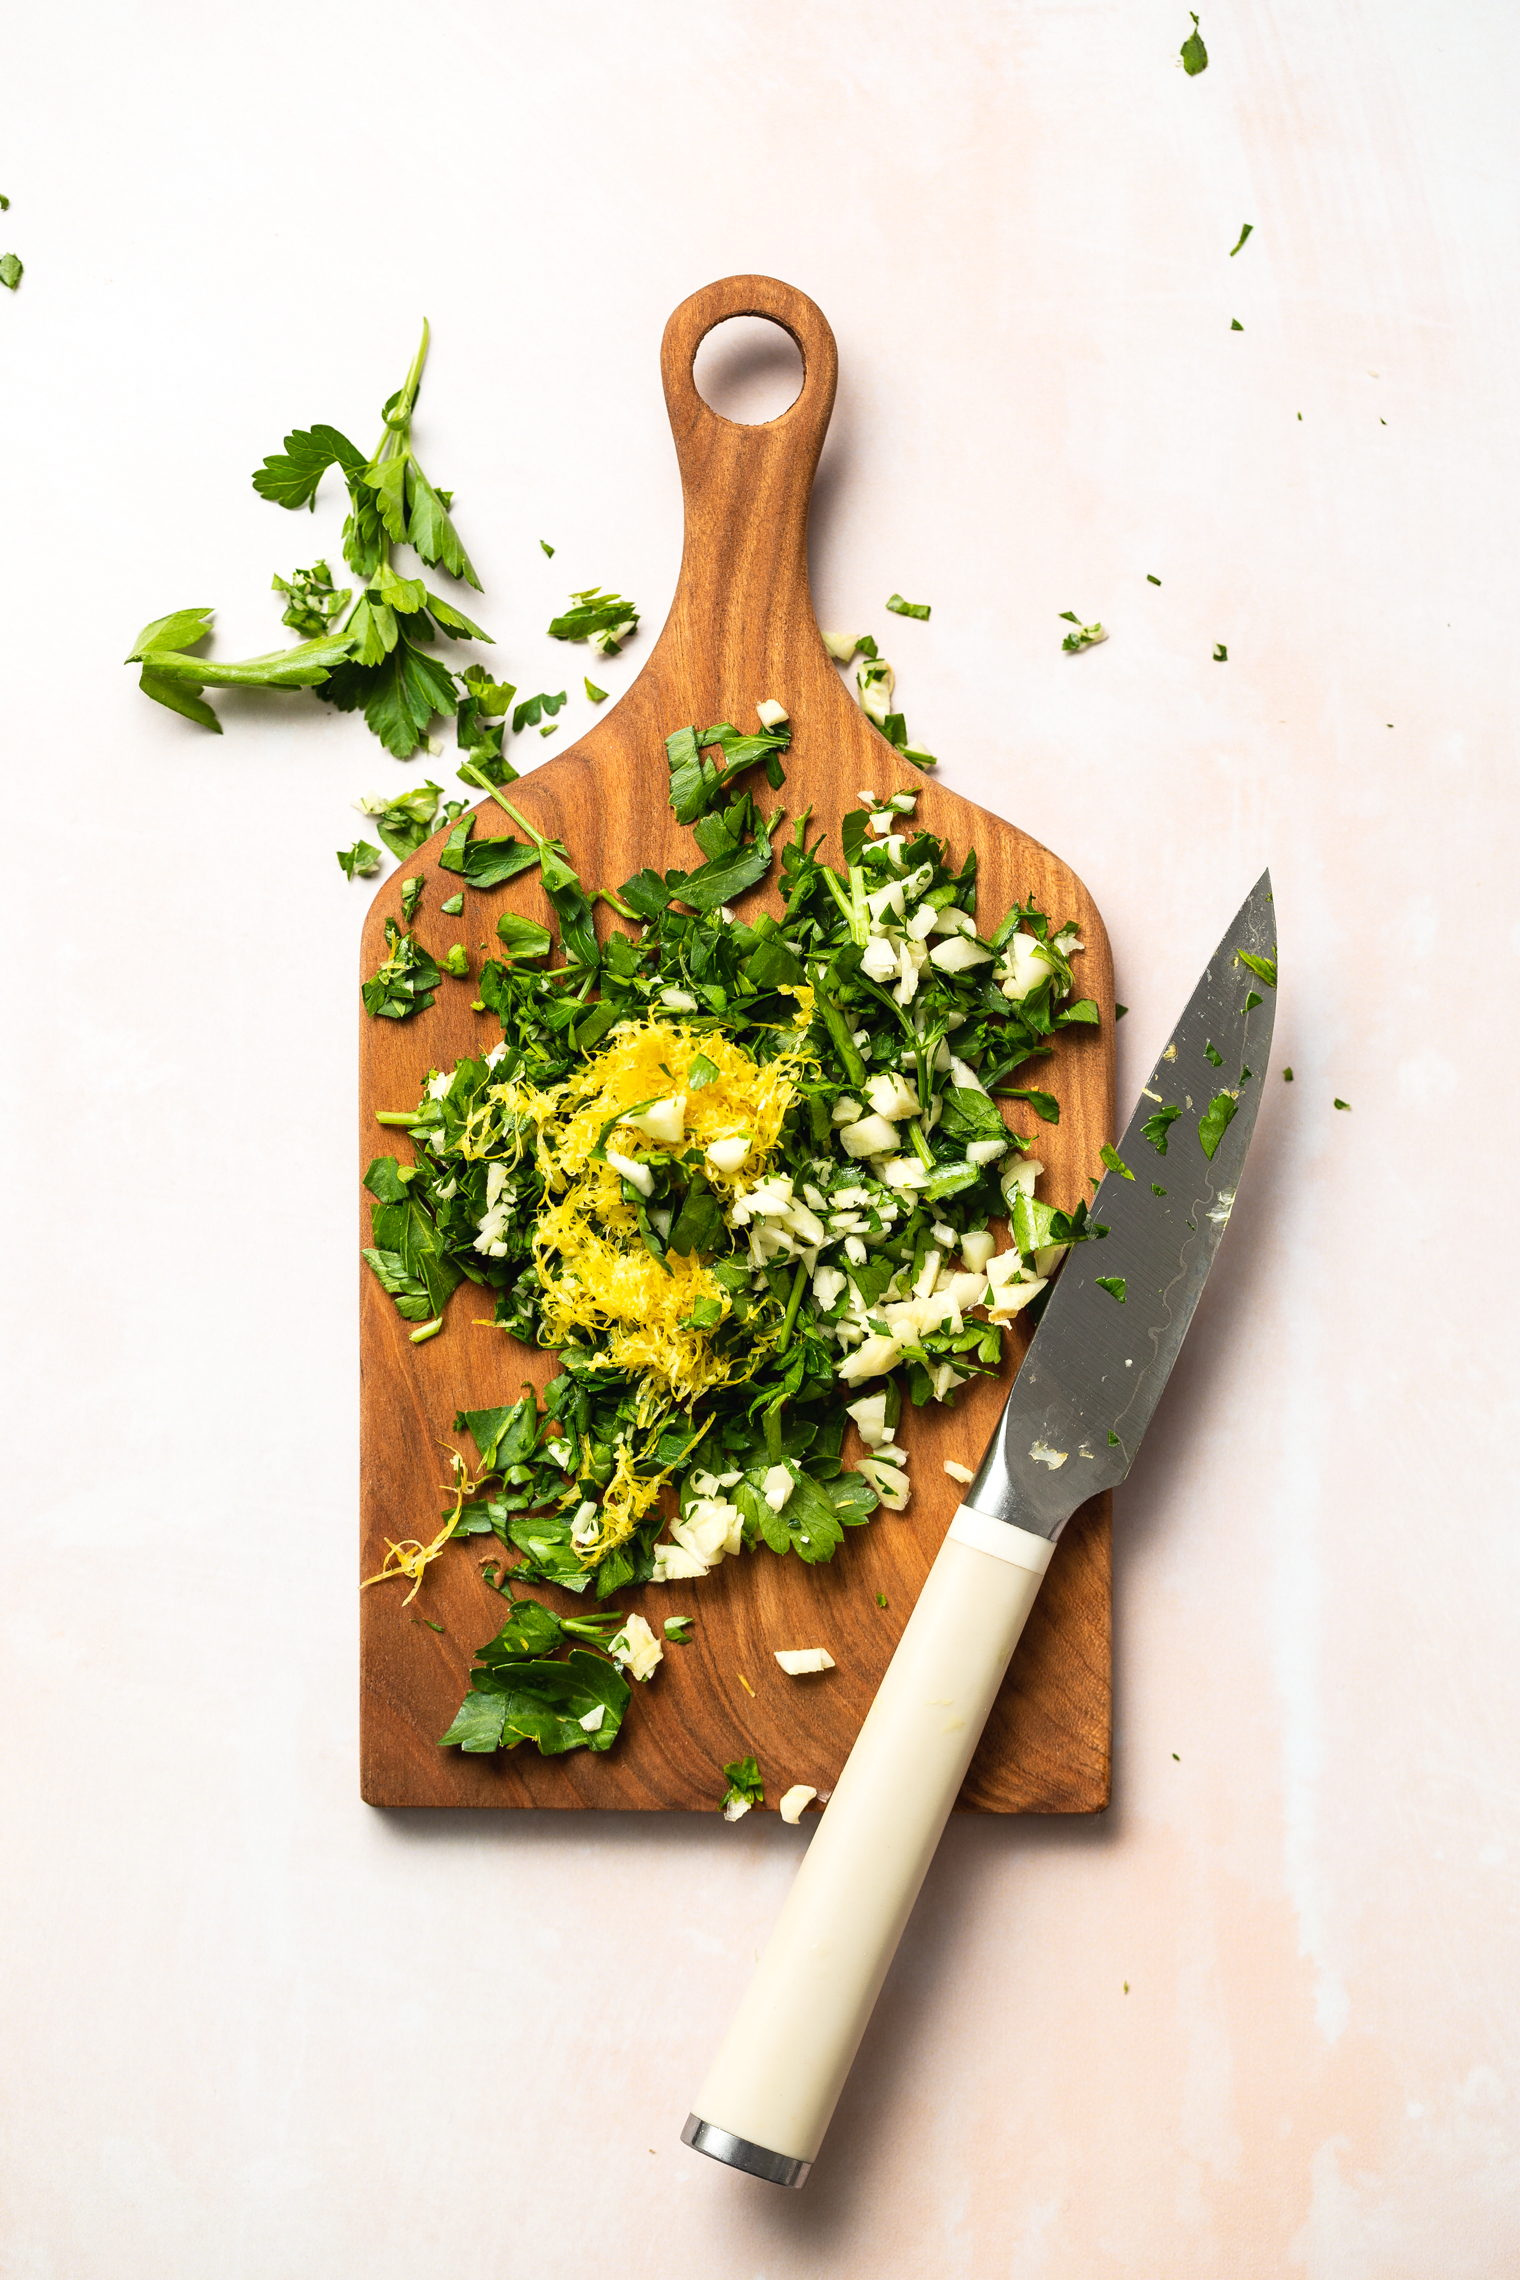 Gremolata vs Chimichurri: What is the difference?